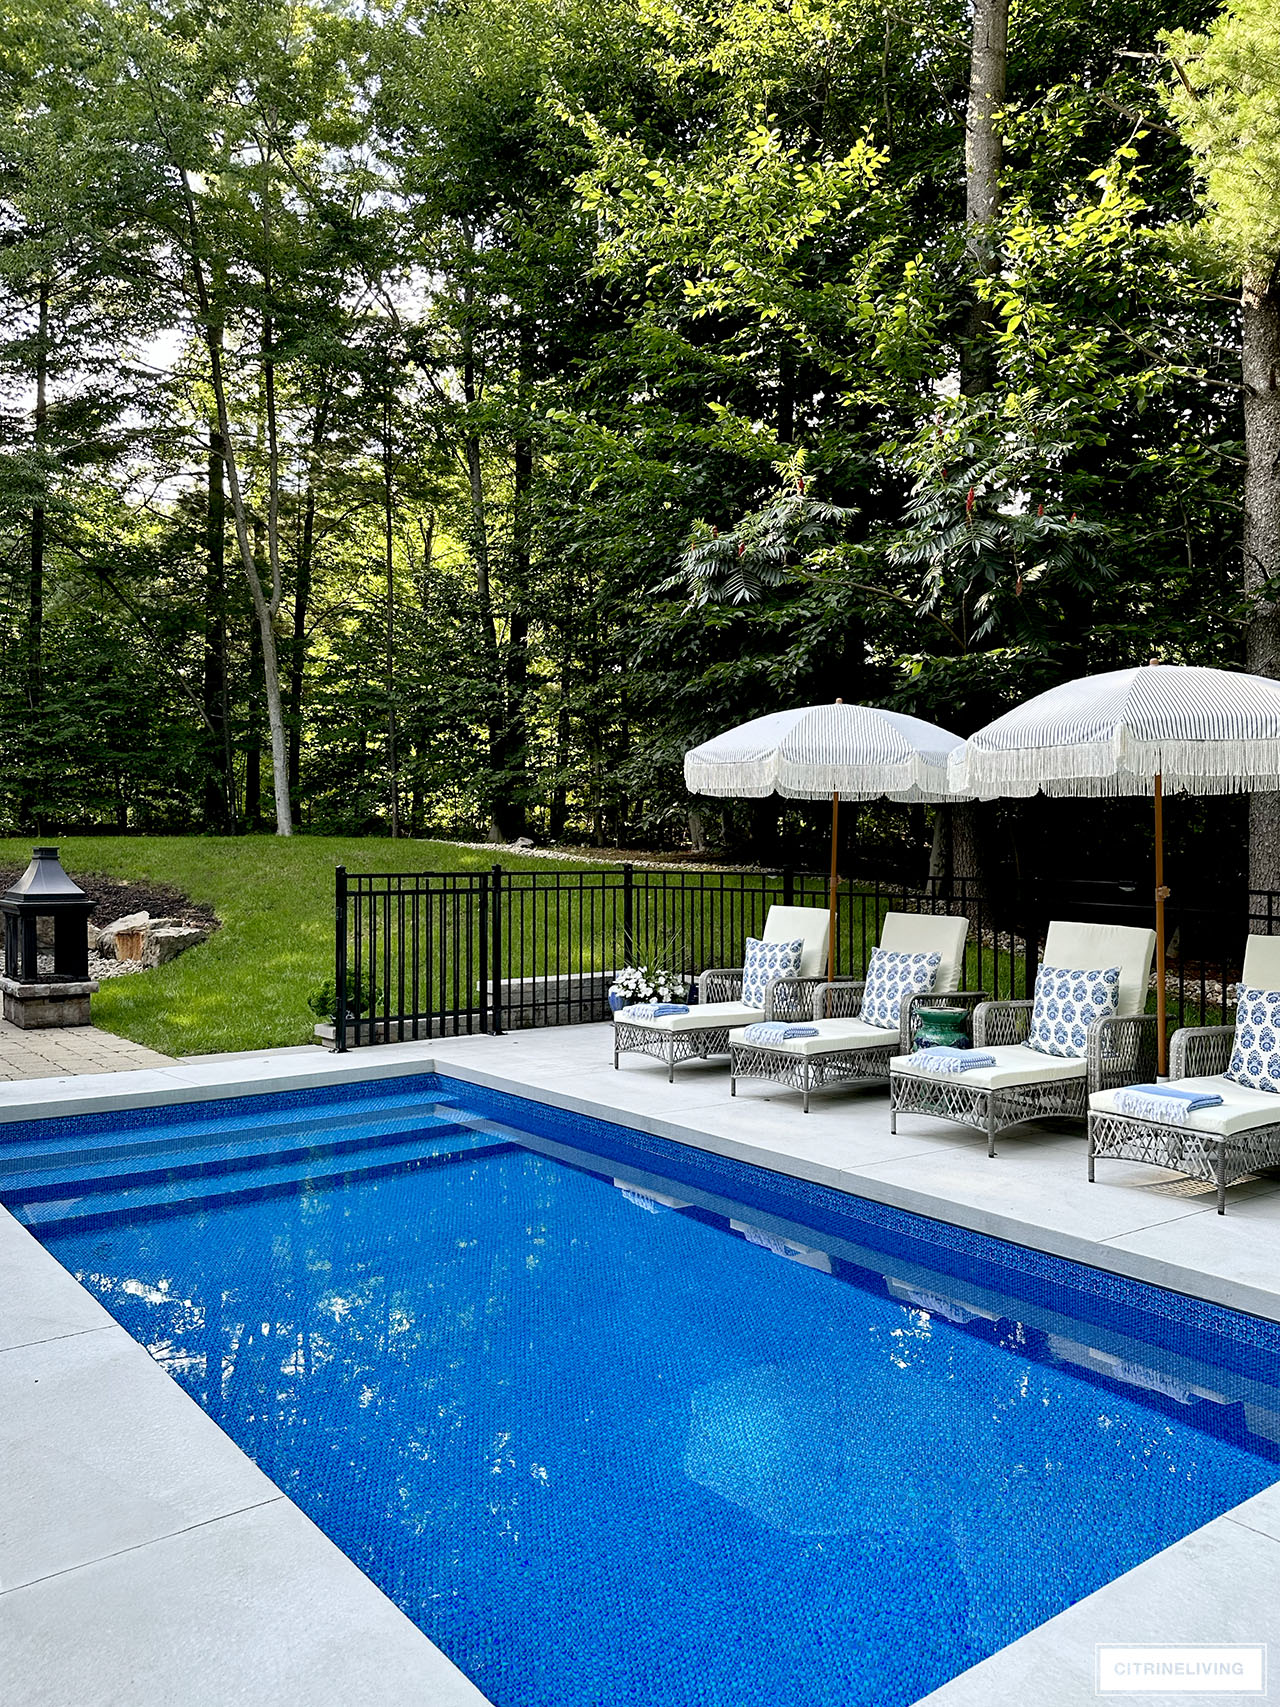 Resort style in ground pool with loungers and umbrellas